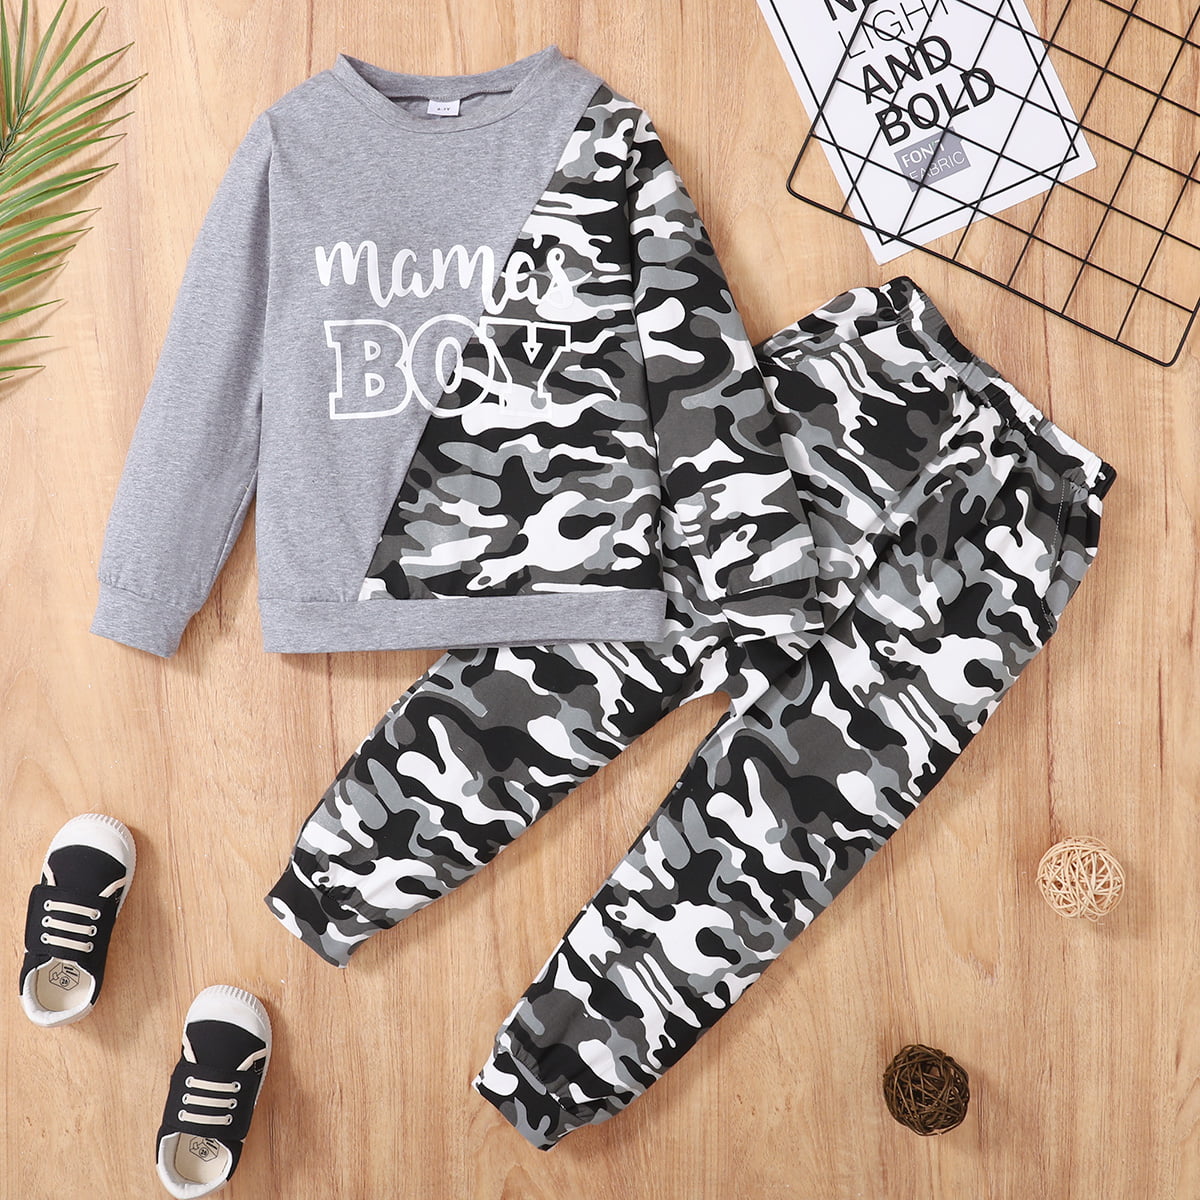 2pcs Baby Boy Letter Print Grey Camouflage Long-sleeve Sweatshirts and Trousers Set